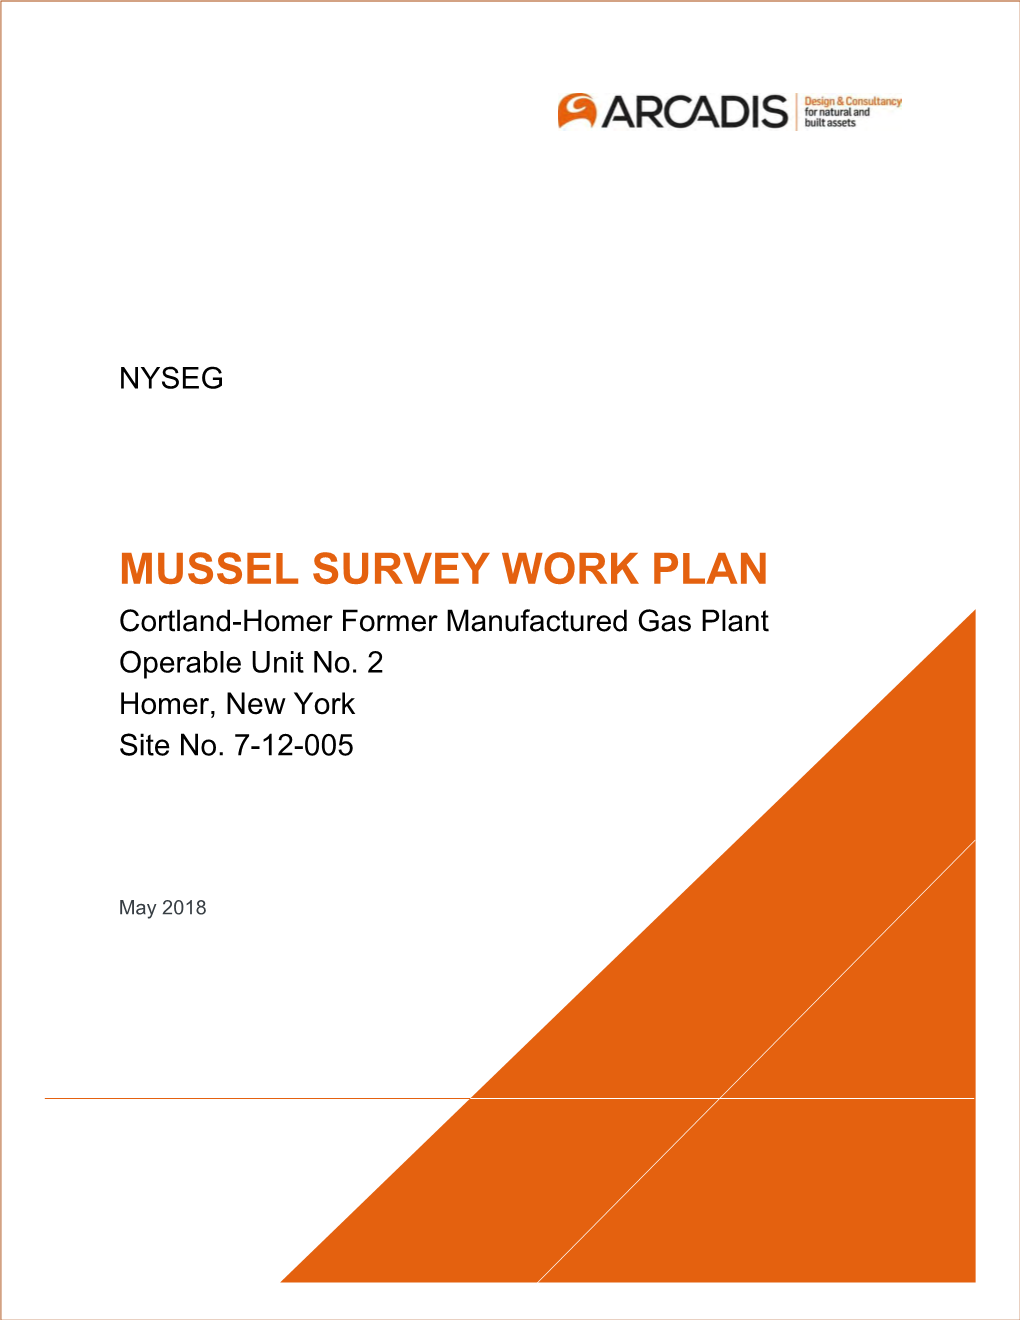 MUSSEL SURVEY WORK PLAN Cortland-Homer Former Manufactured Gas Plant Operable Unit No